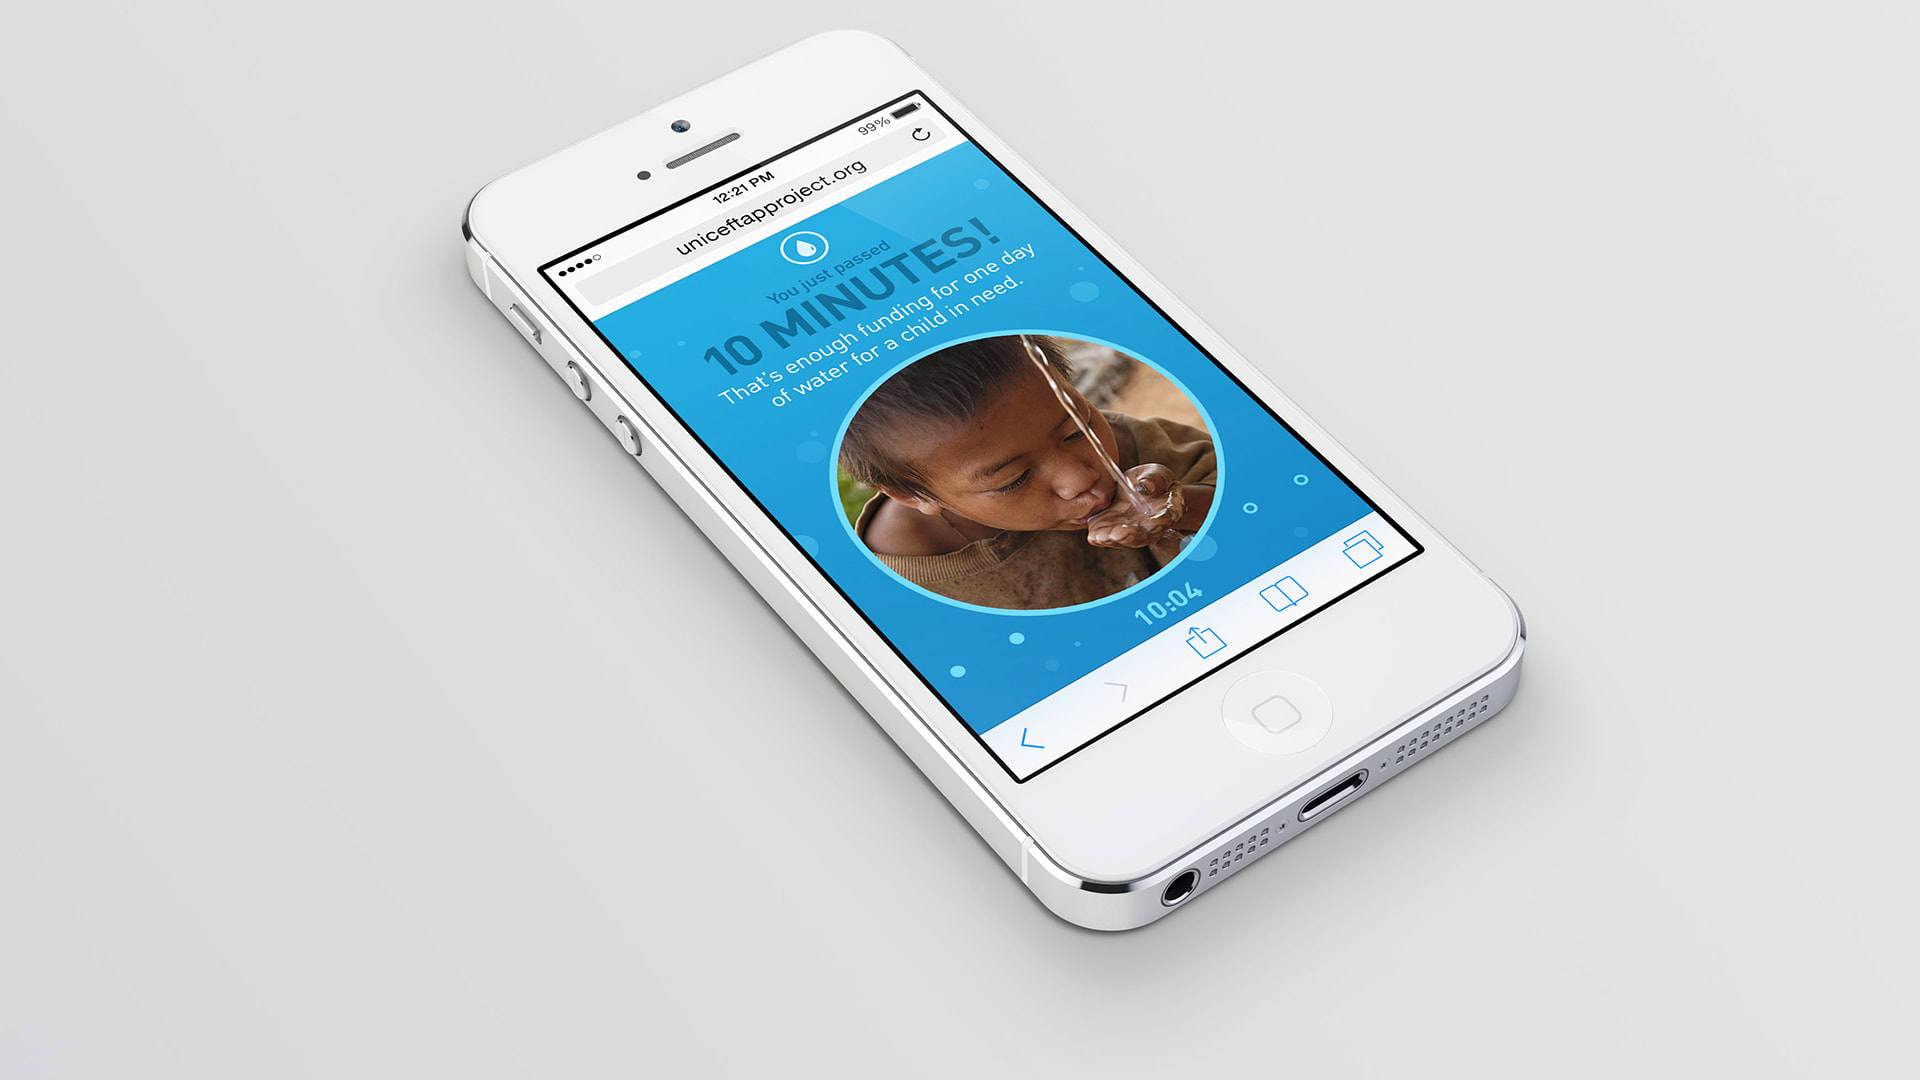 If You Can Stay Off Your Phone For 10 Freaking Minutes, Kids In Need Will Get Clean Water